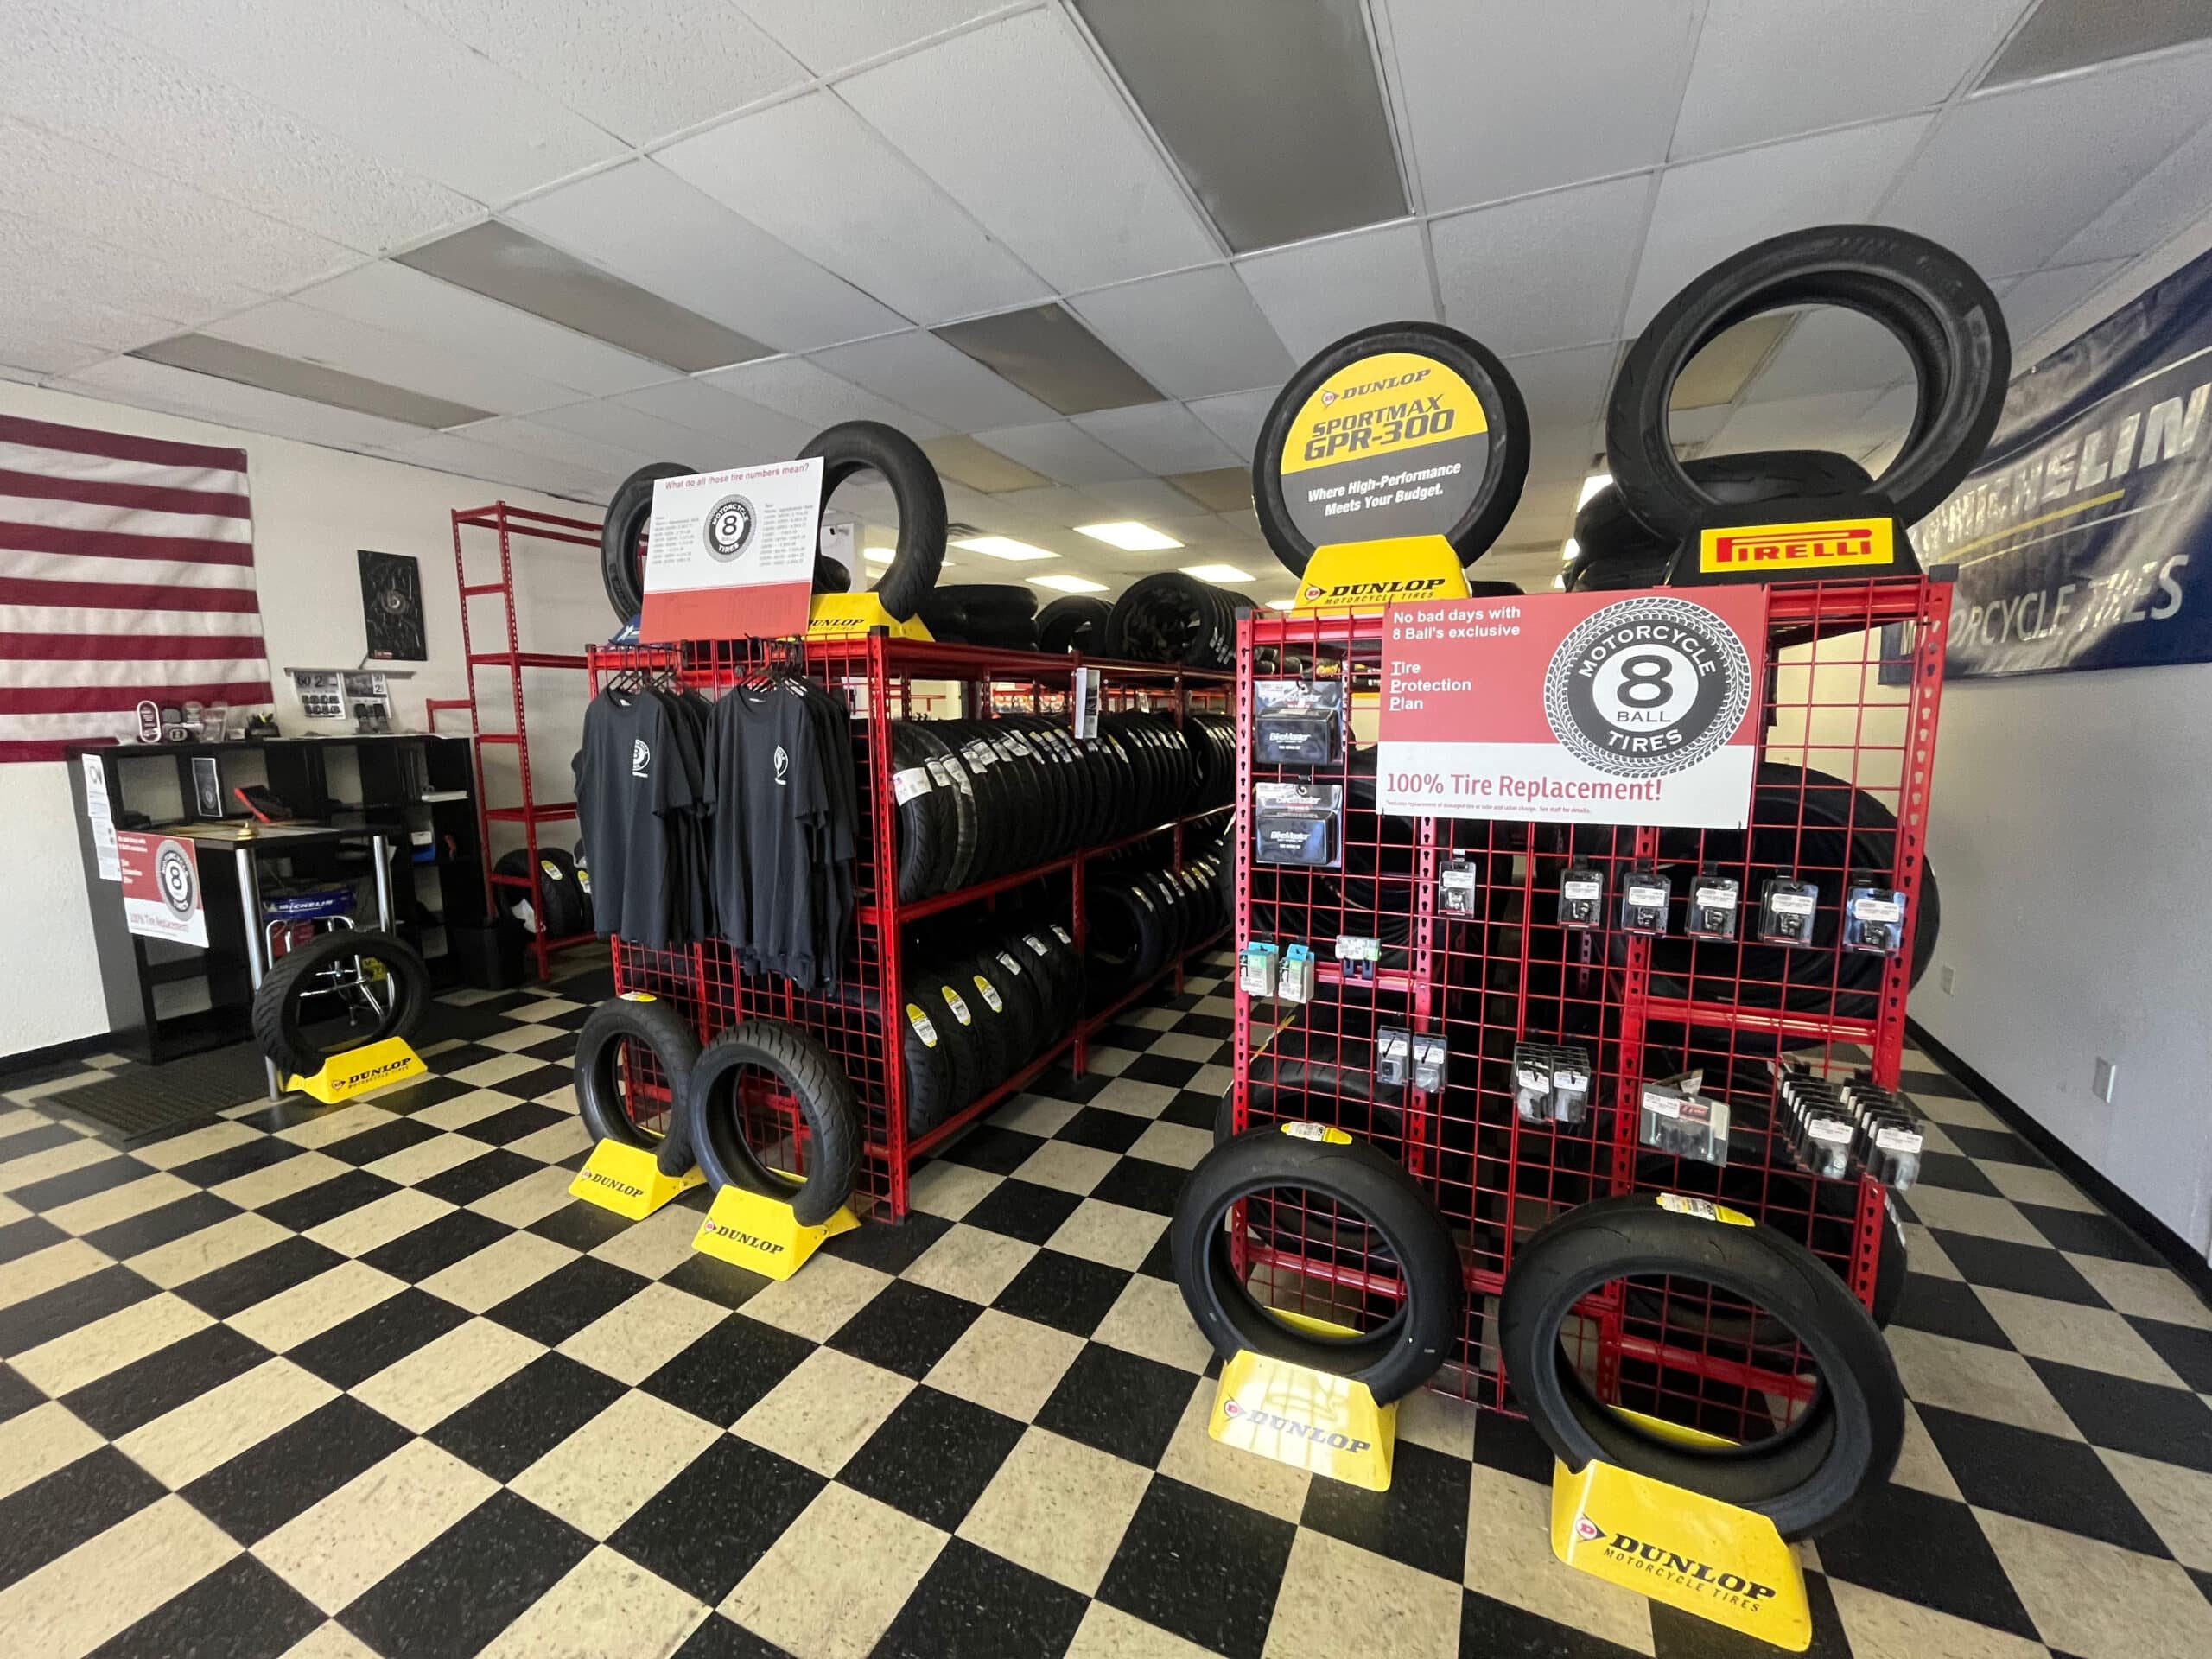 8 Ball Tires in Escondido, CA offers motorcycle tires